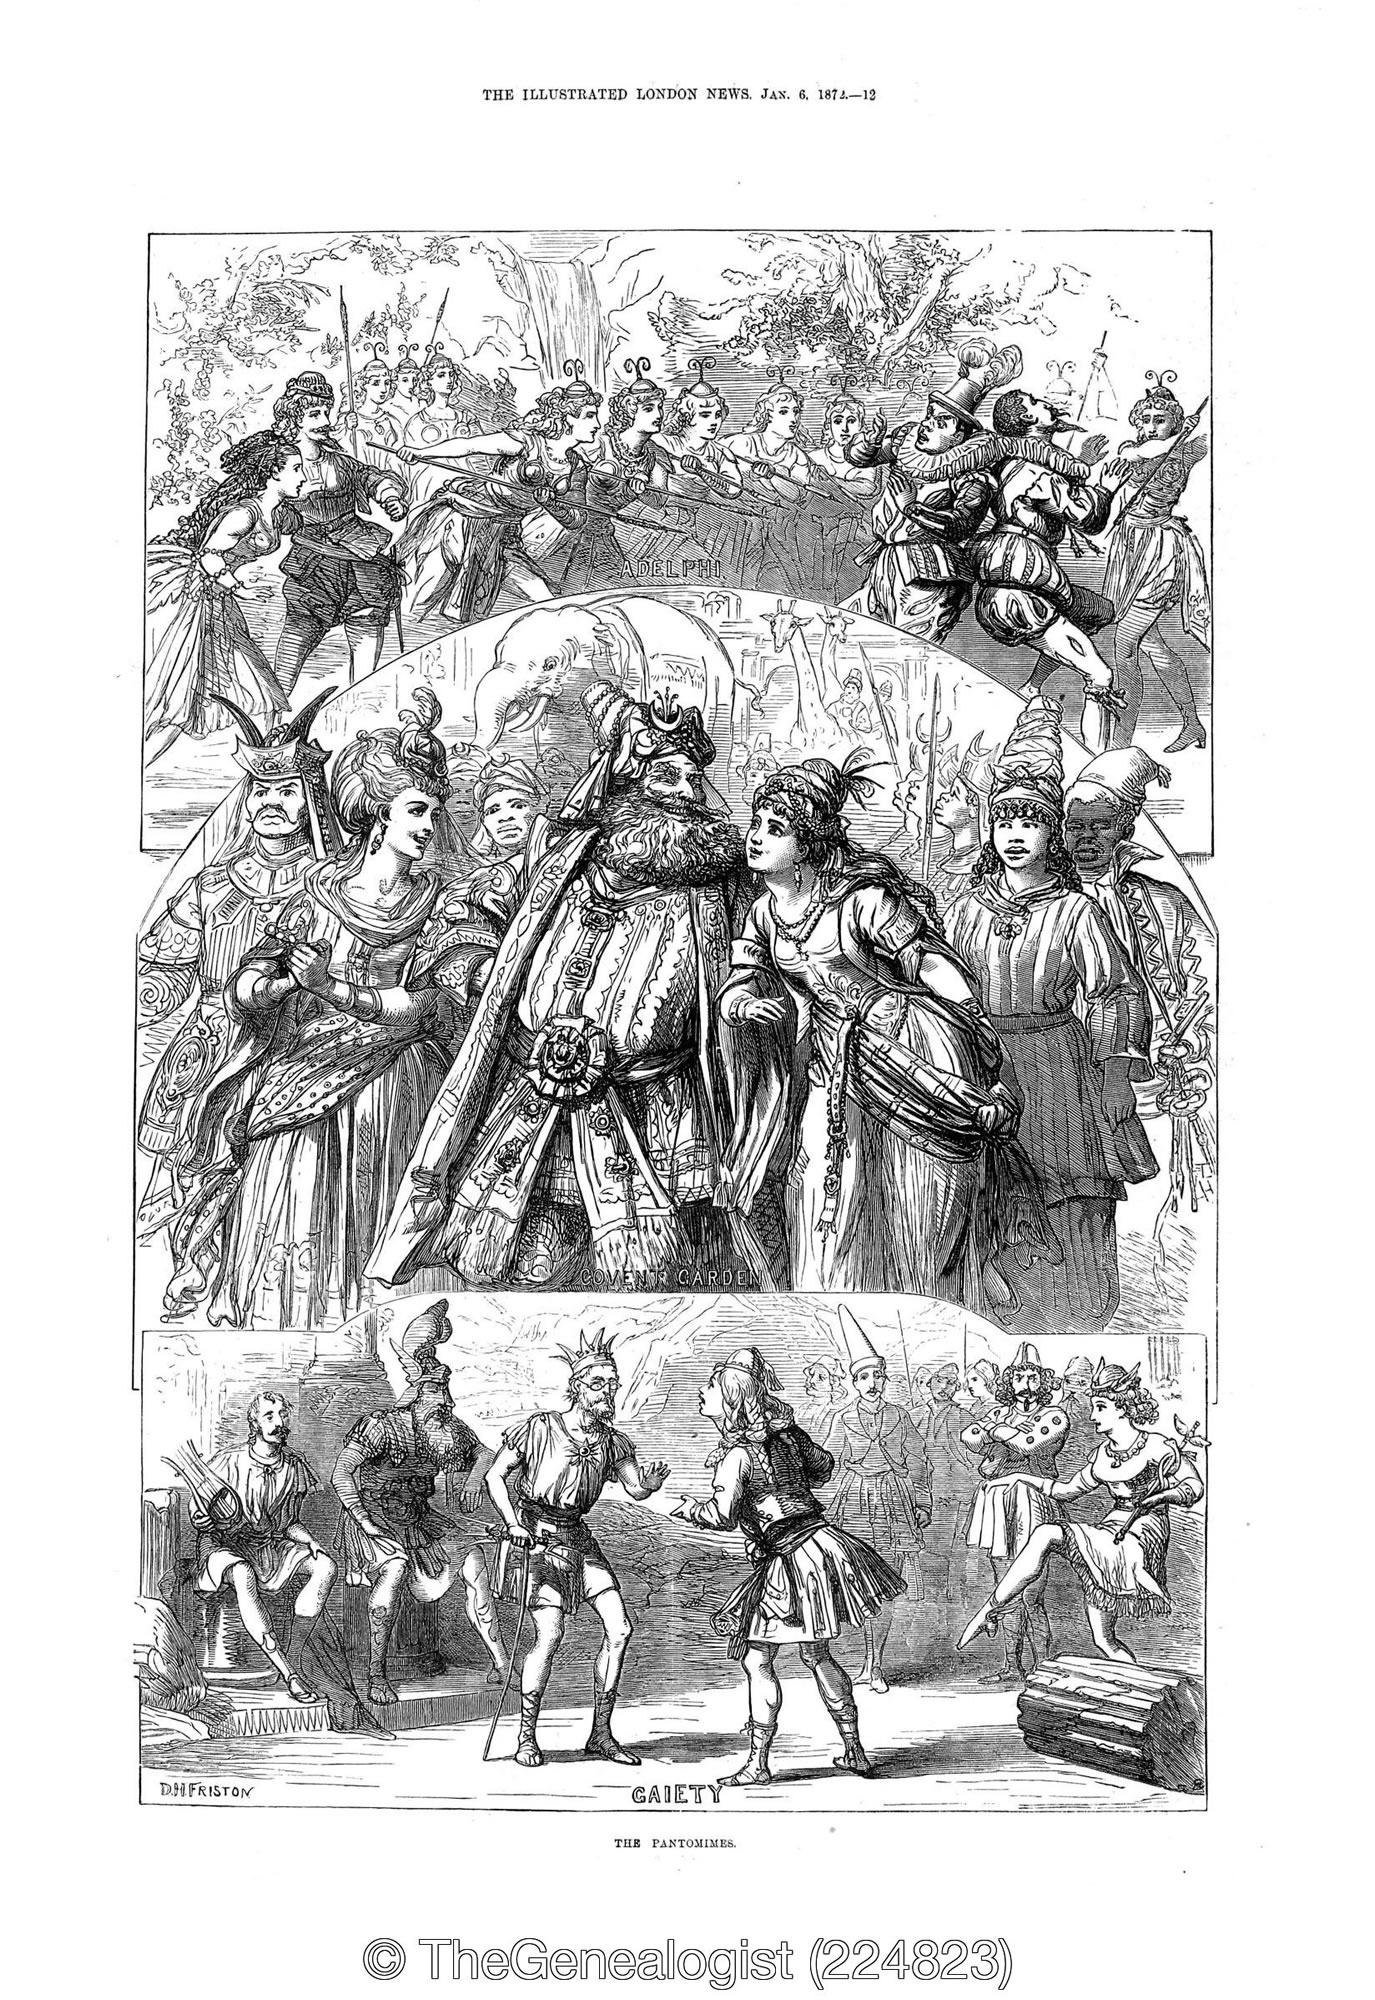 The Illustrated London News January 6, 1872